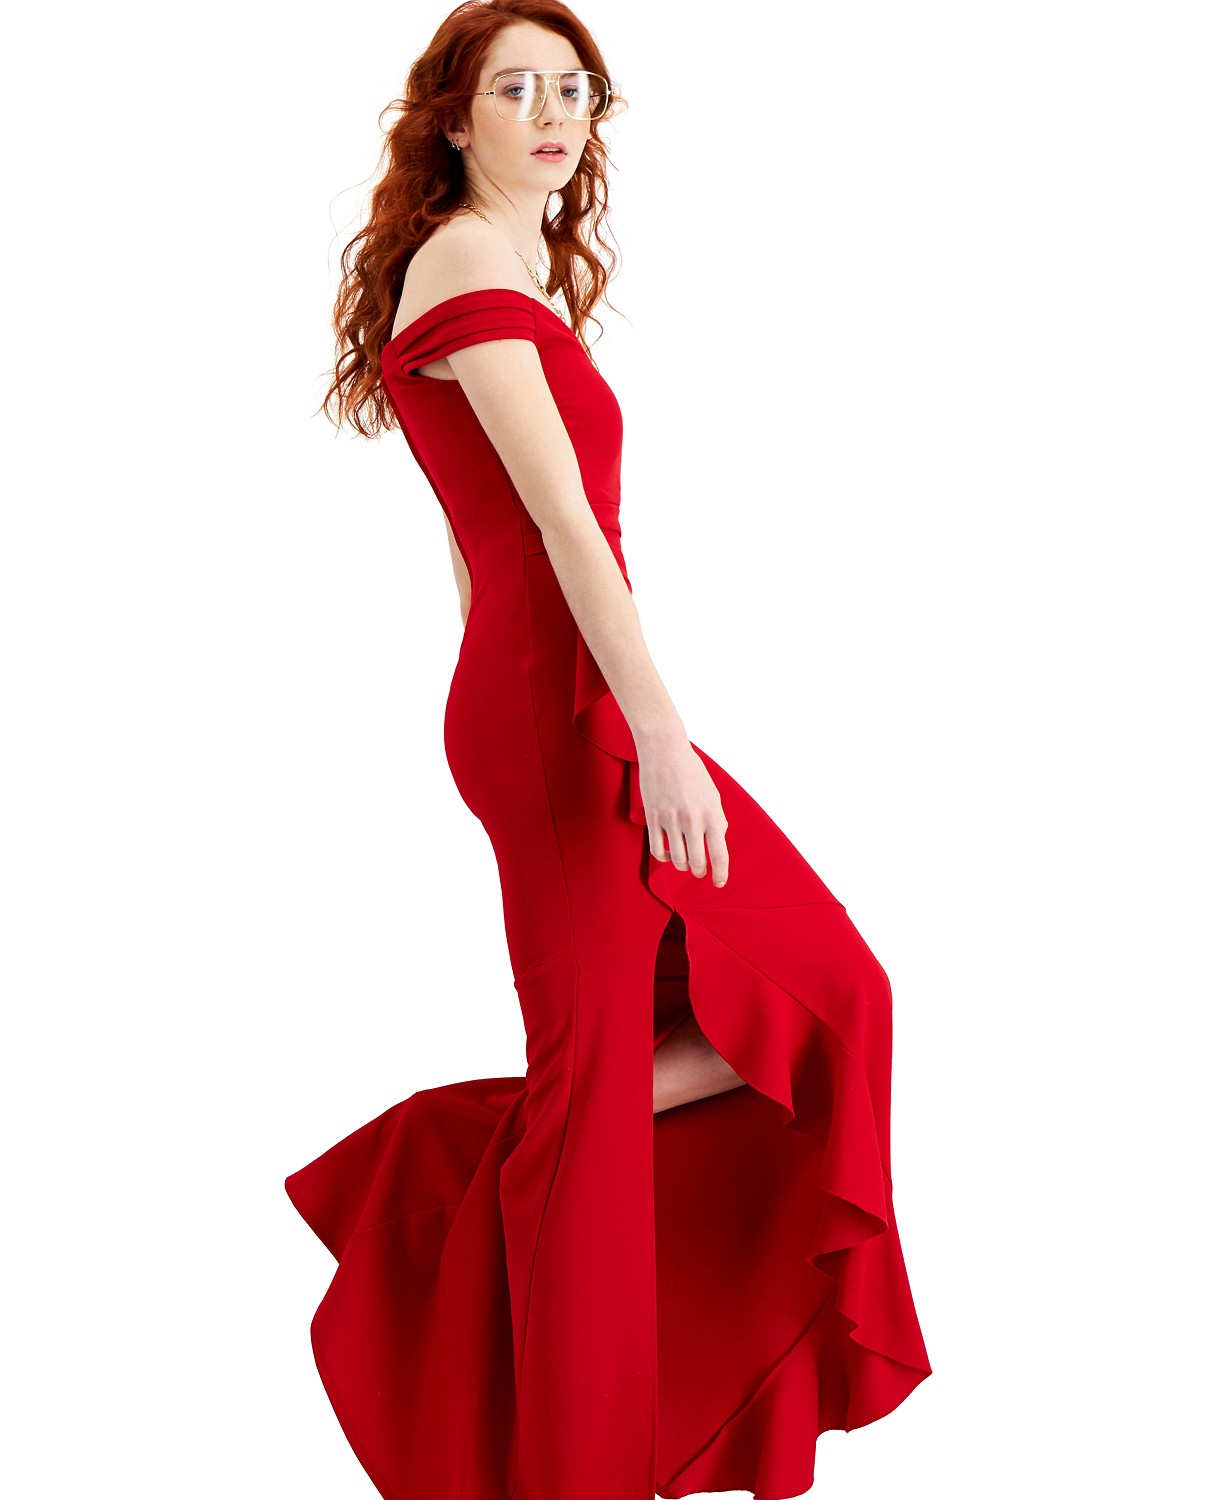 Macy's prom Off the shoulder Ruffled slit Gown Red color back-side